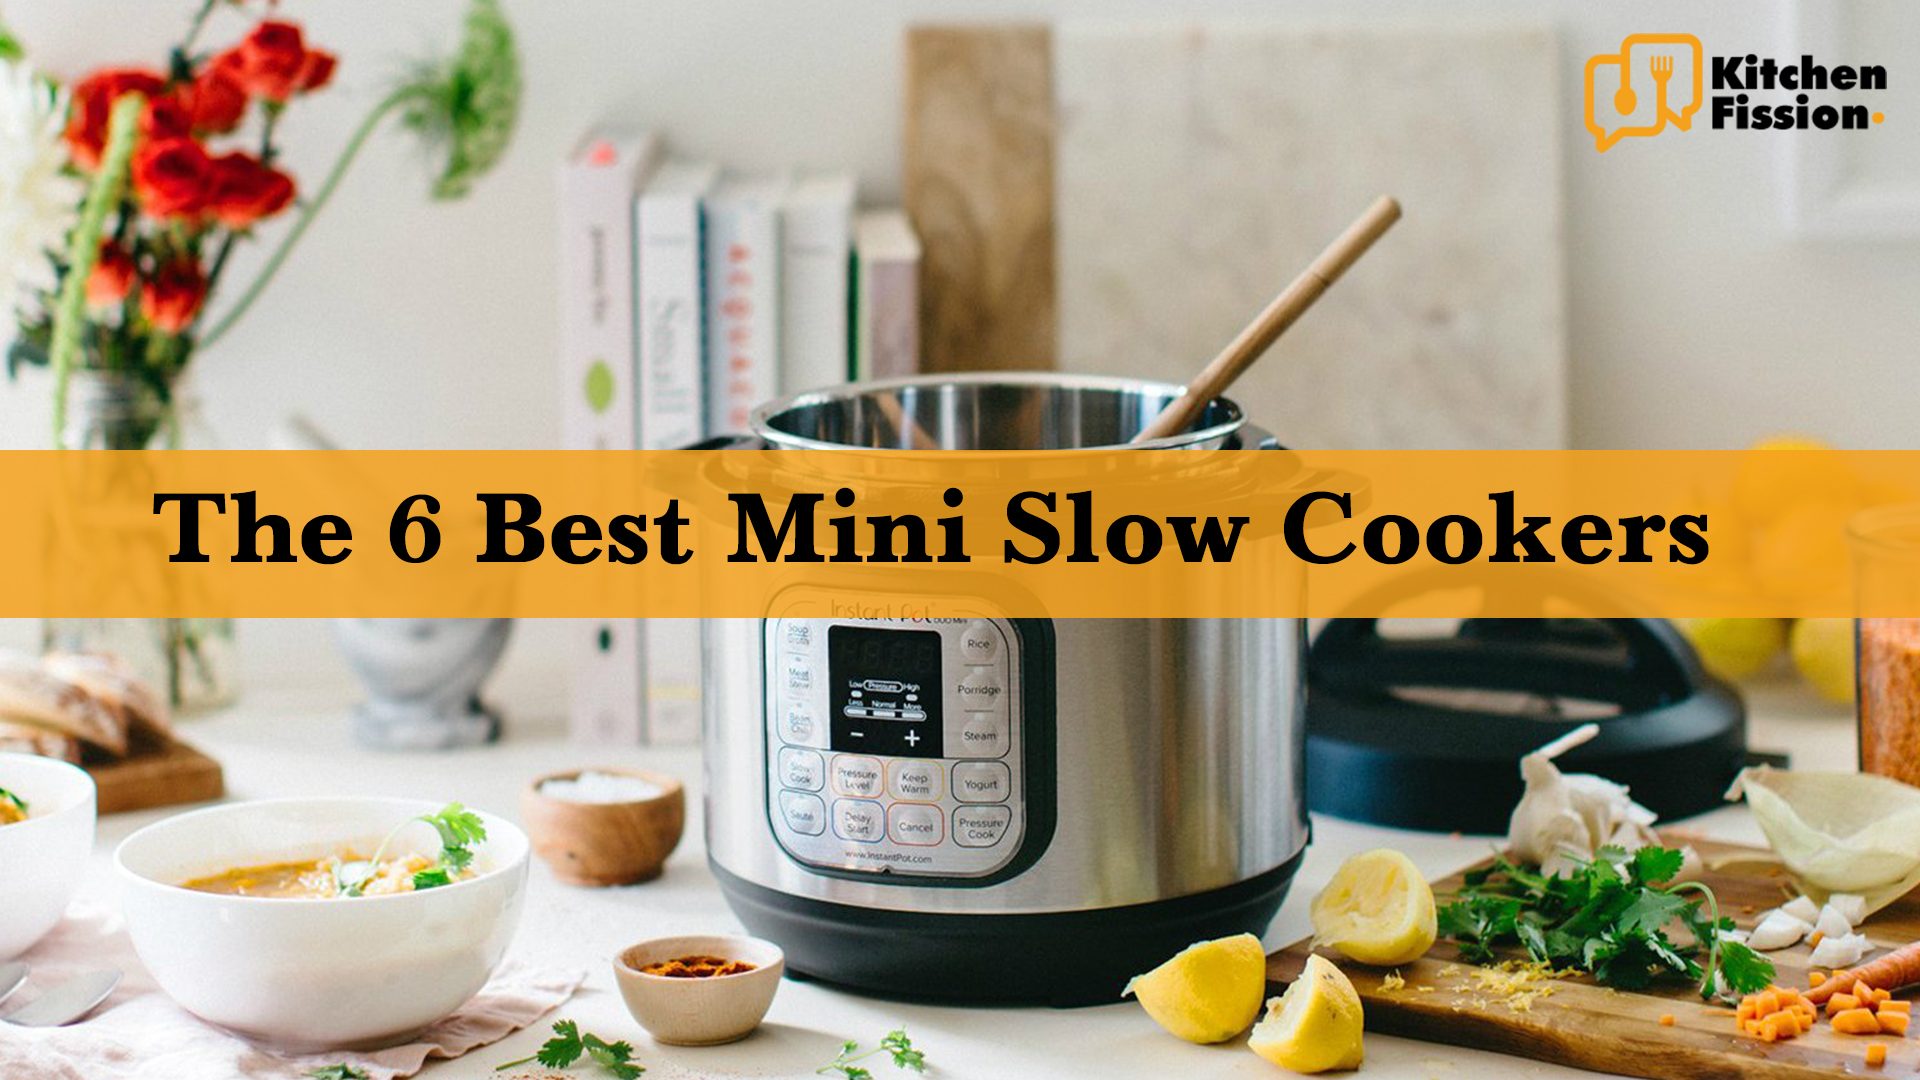 The 6 Best Mini Slow Cookers